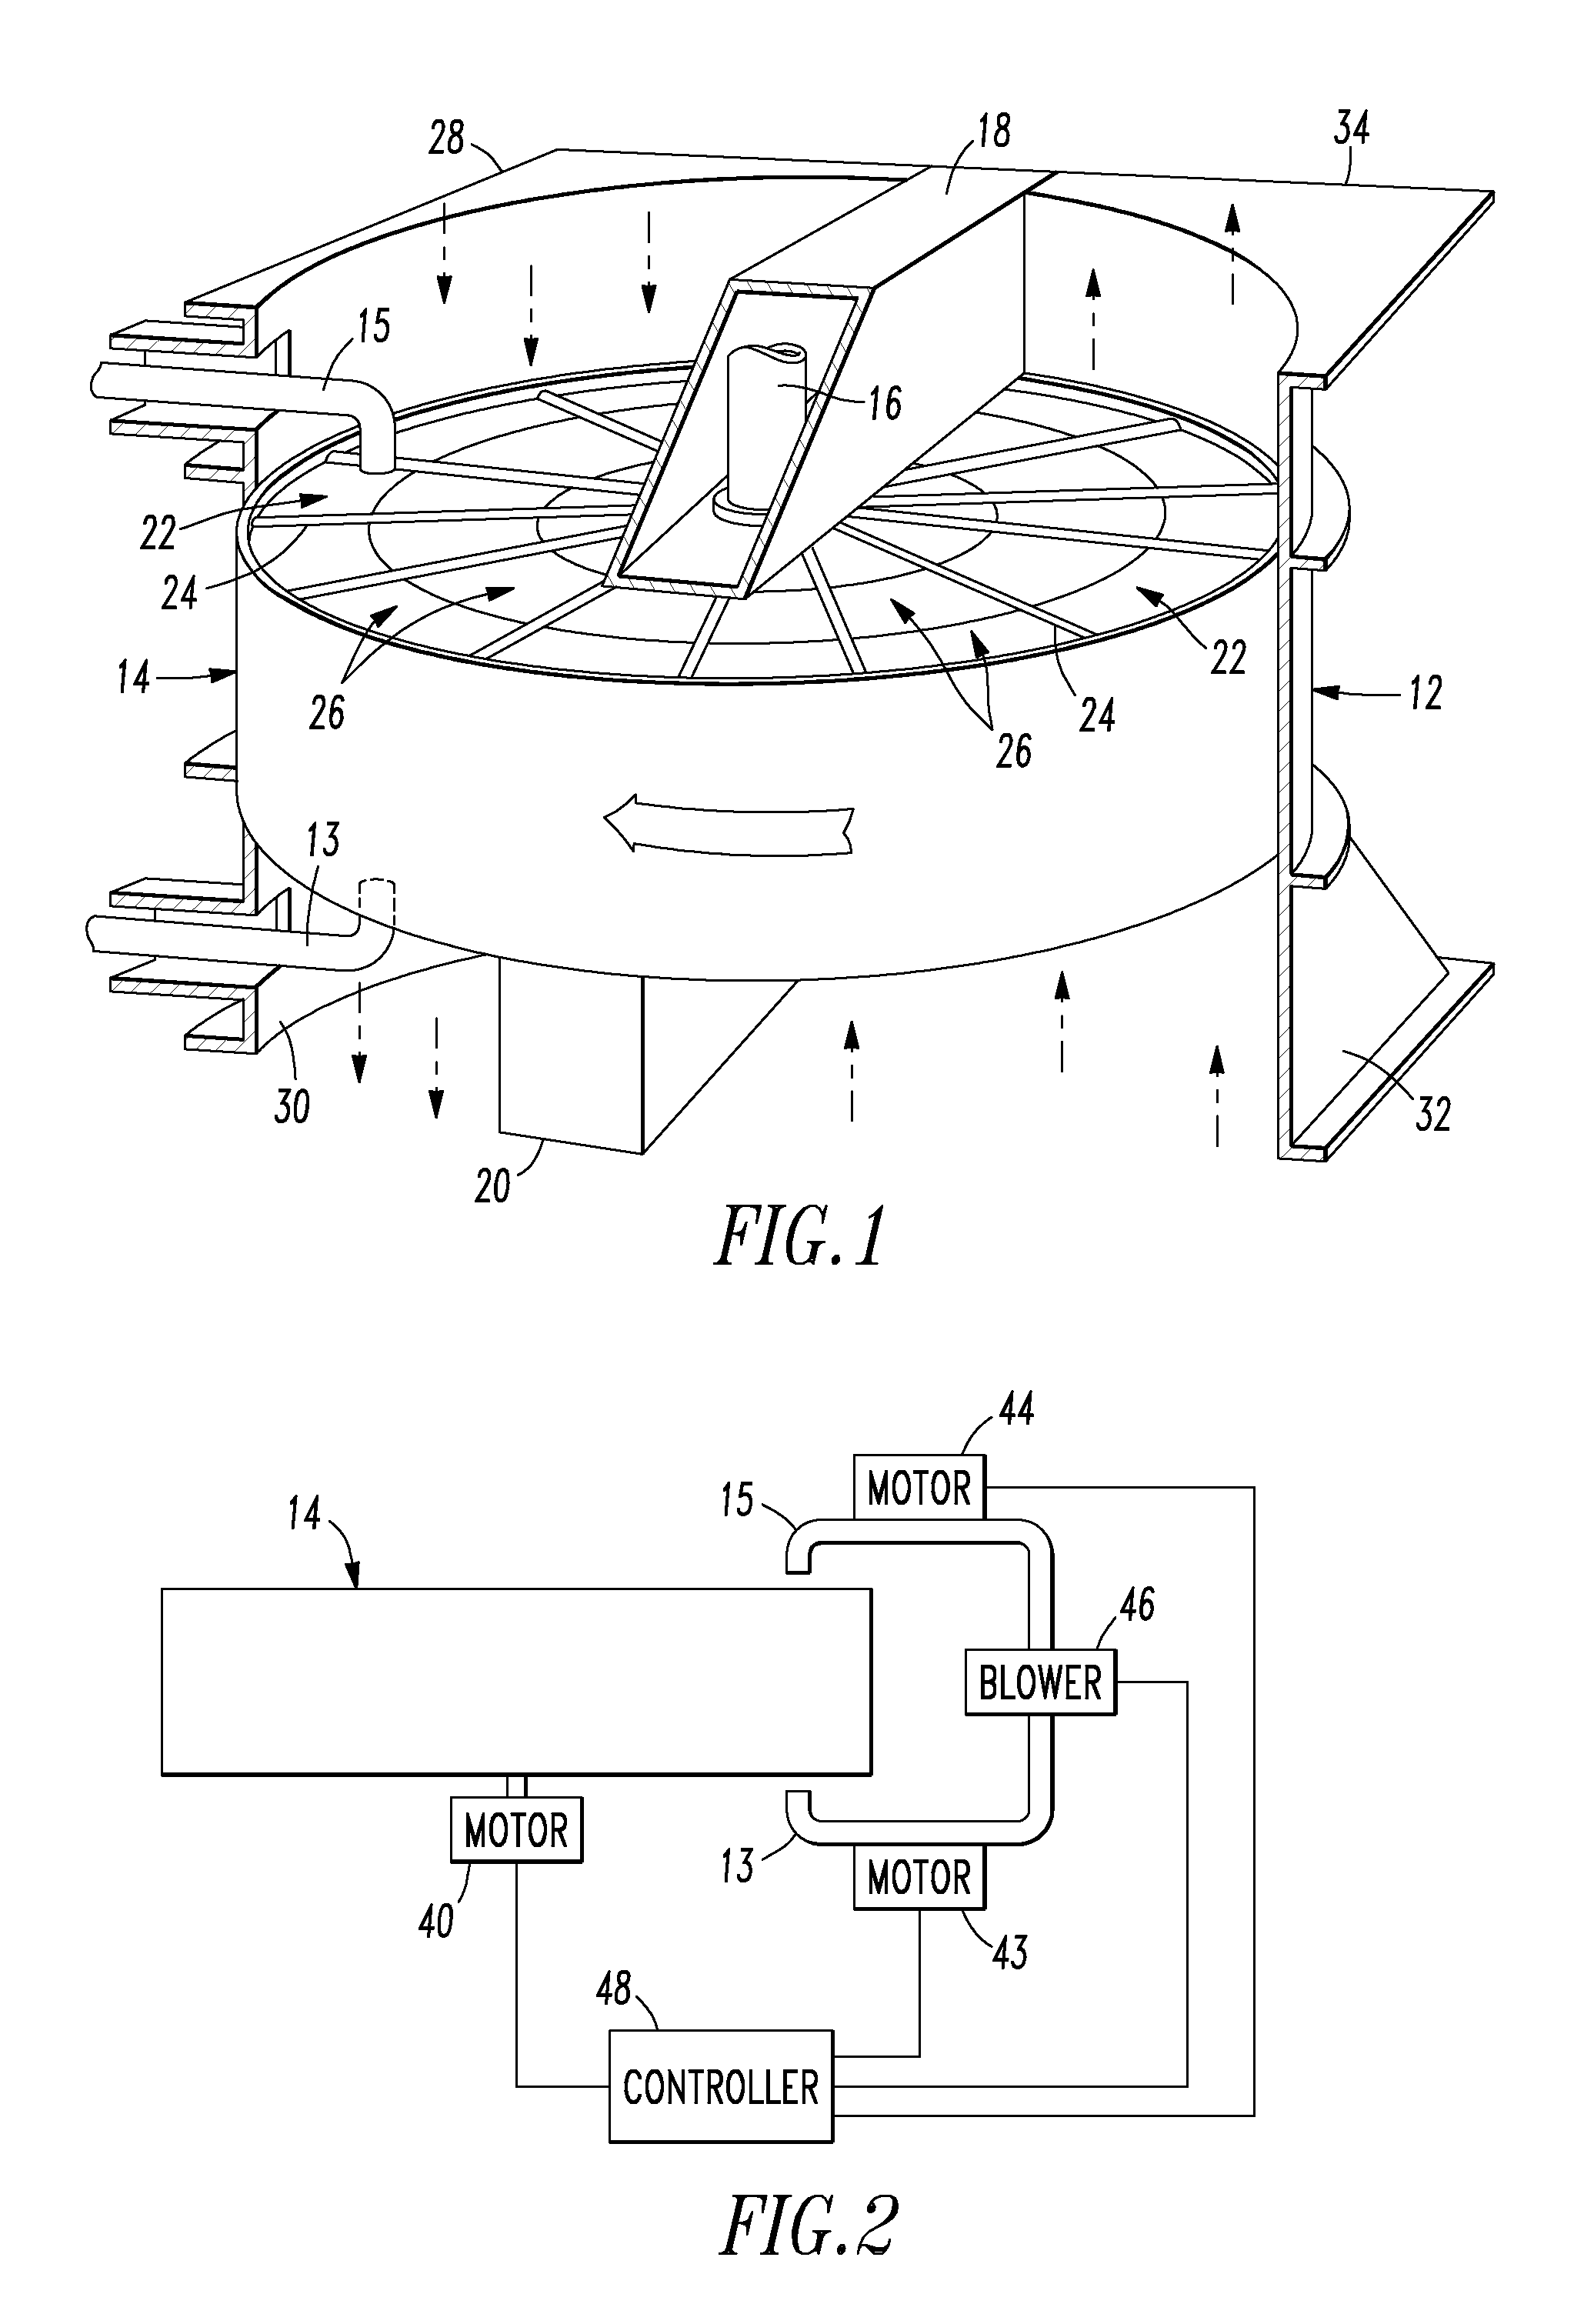 Method for Online Cleaning of Air Preheaters